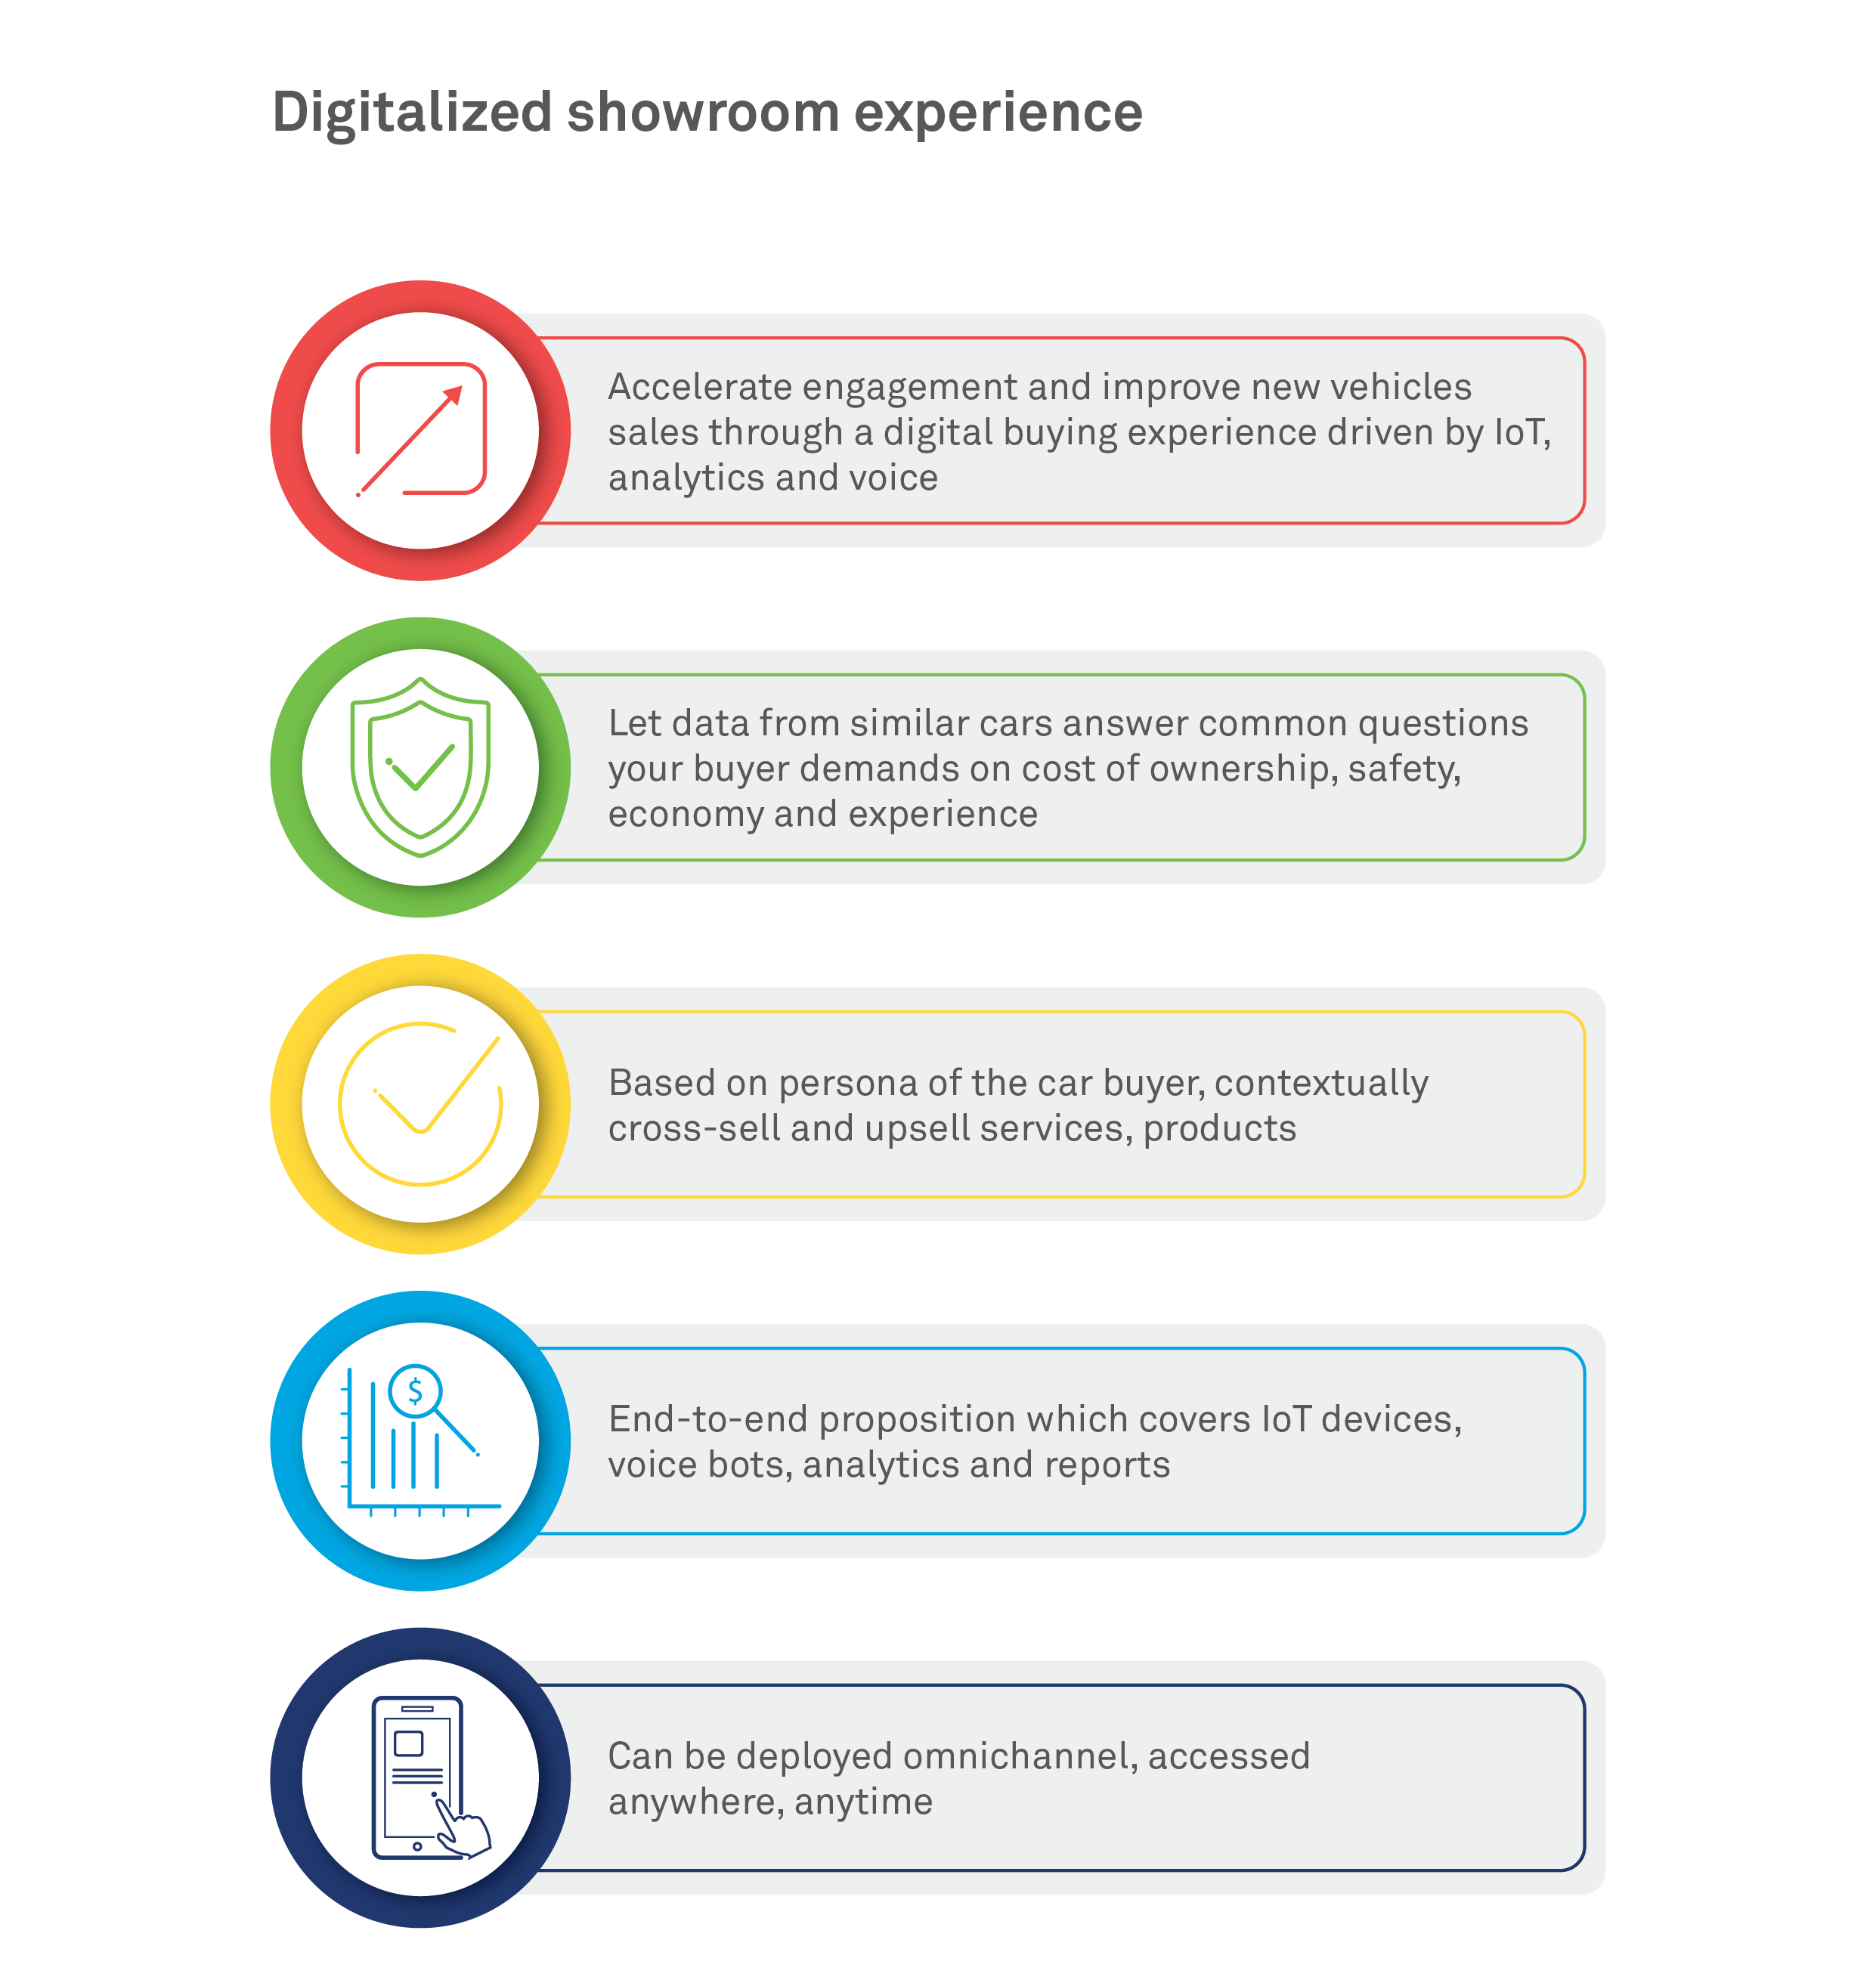 Wipro AutoInsights: Digitalized showroom experience